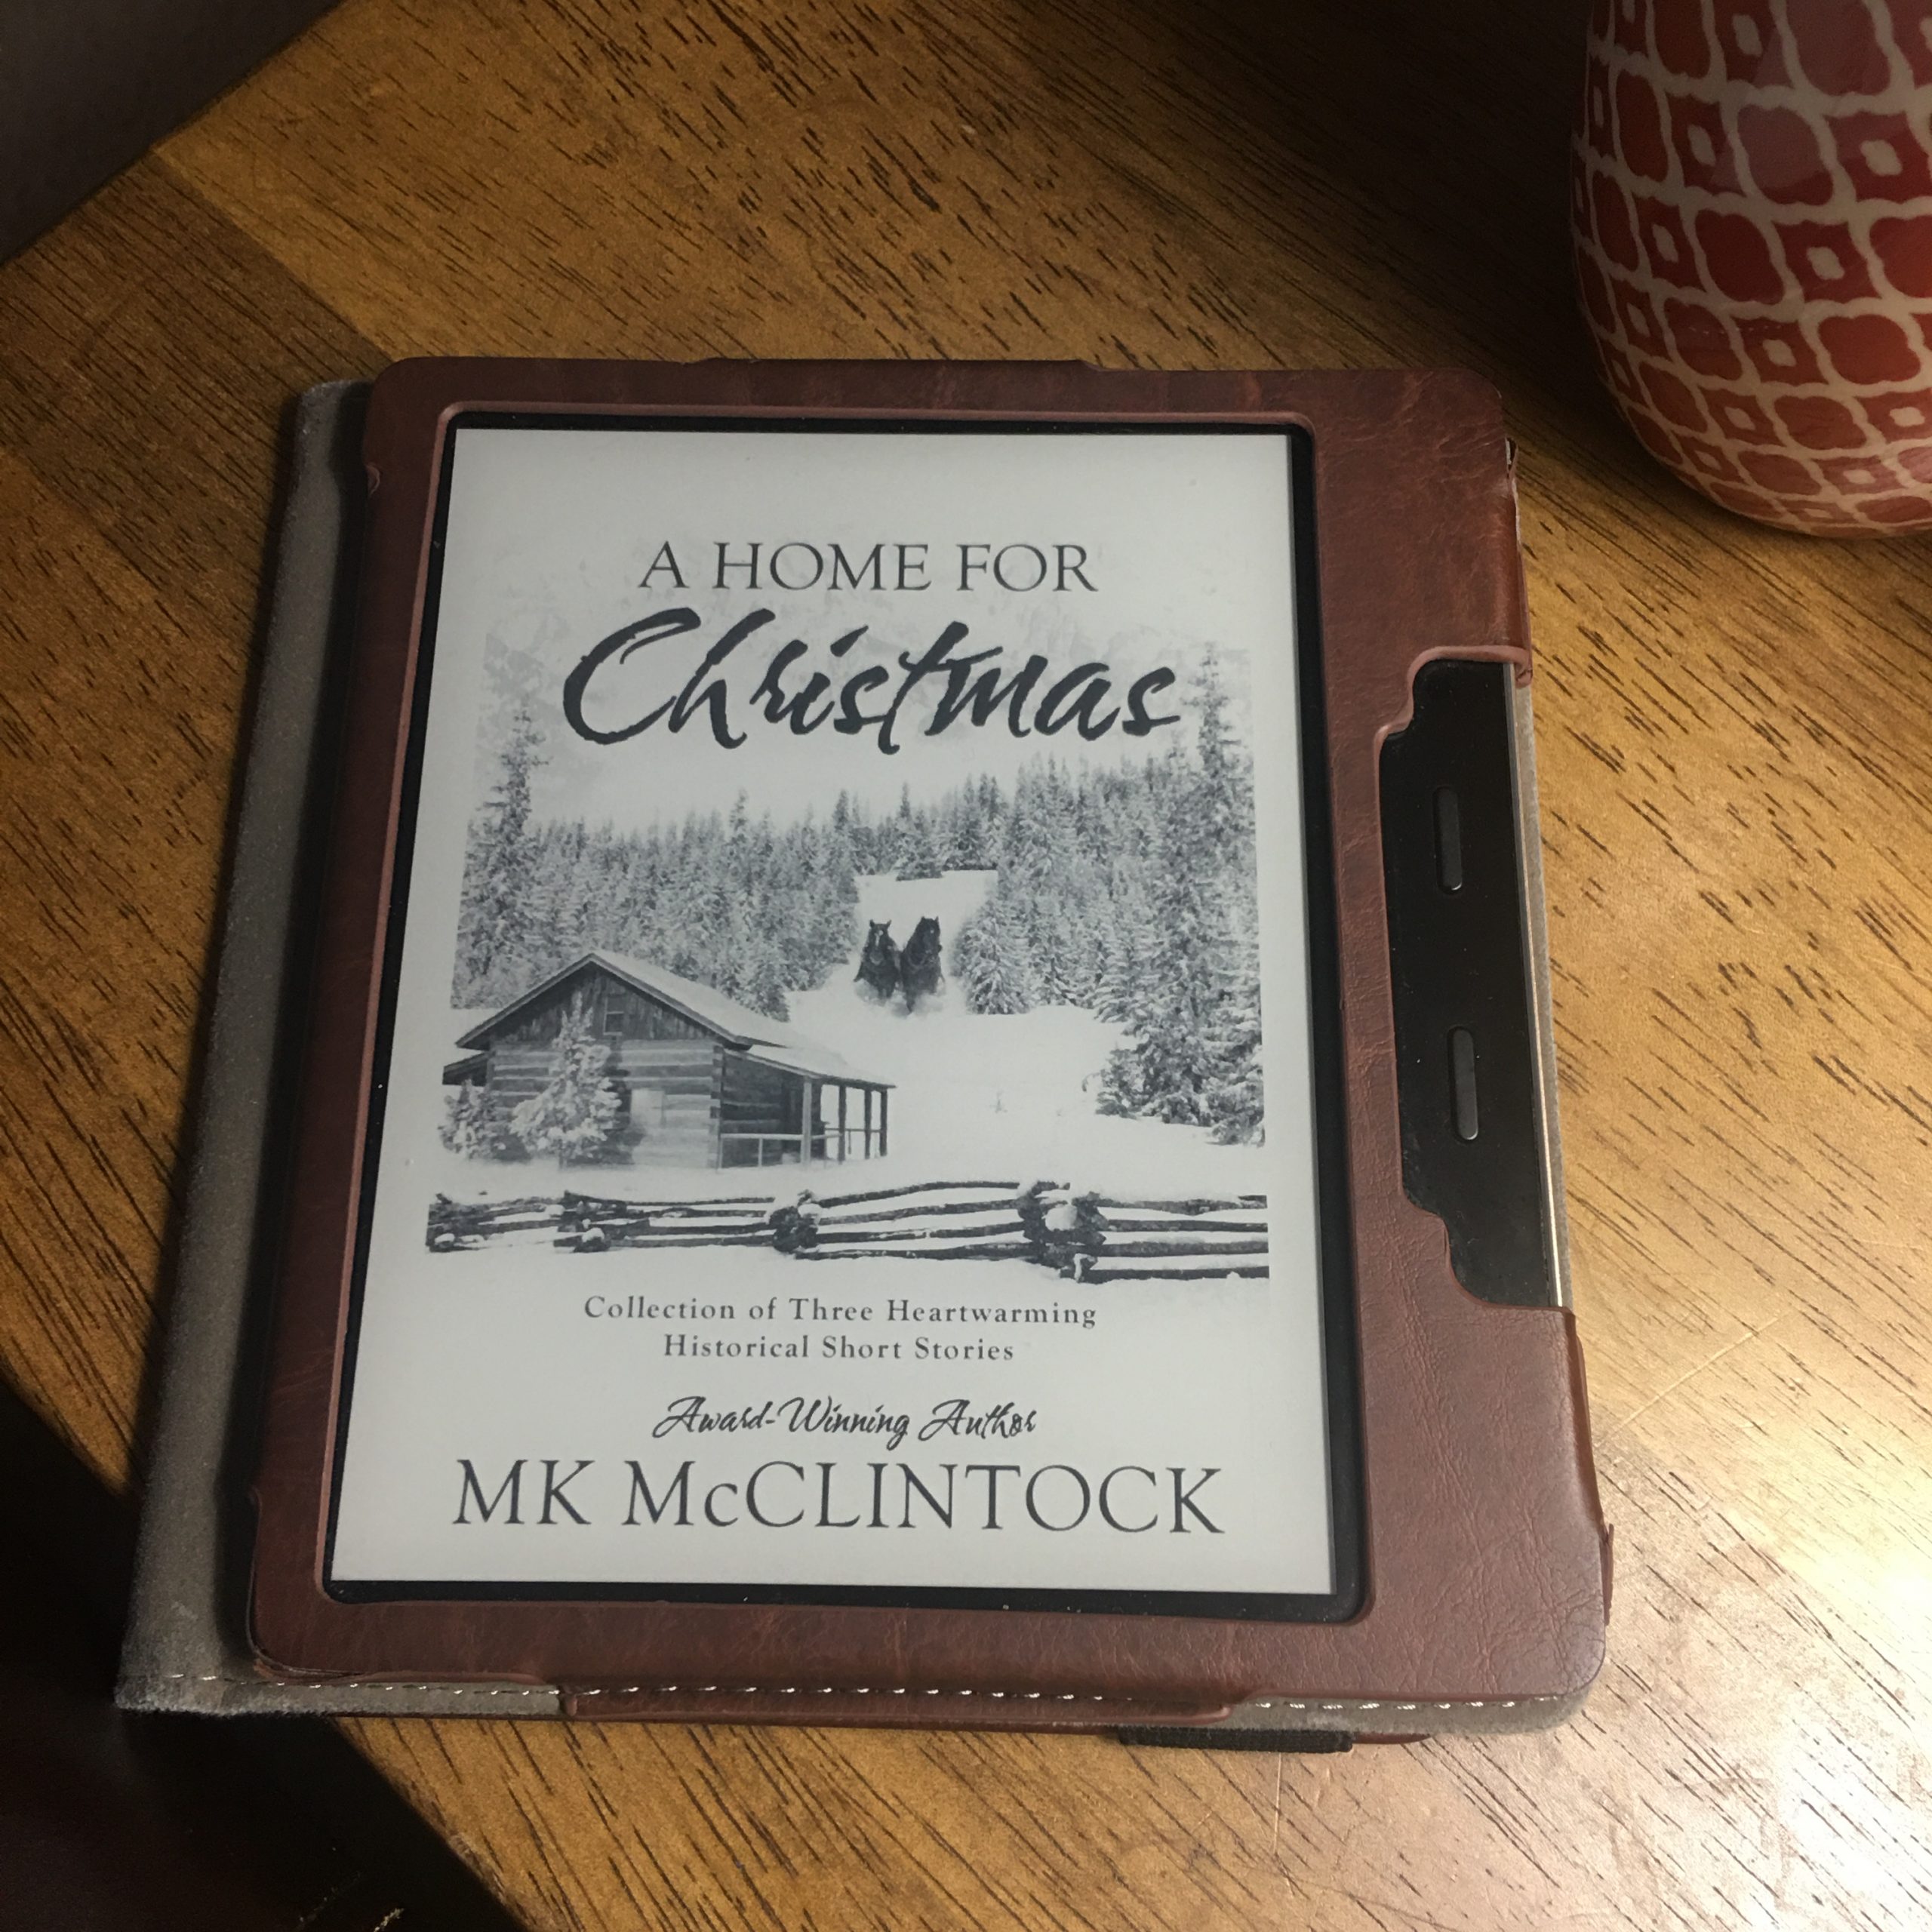 A Home For Christmas by M.K. McClintock